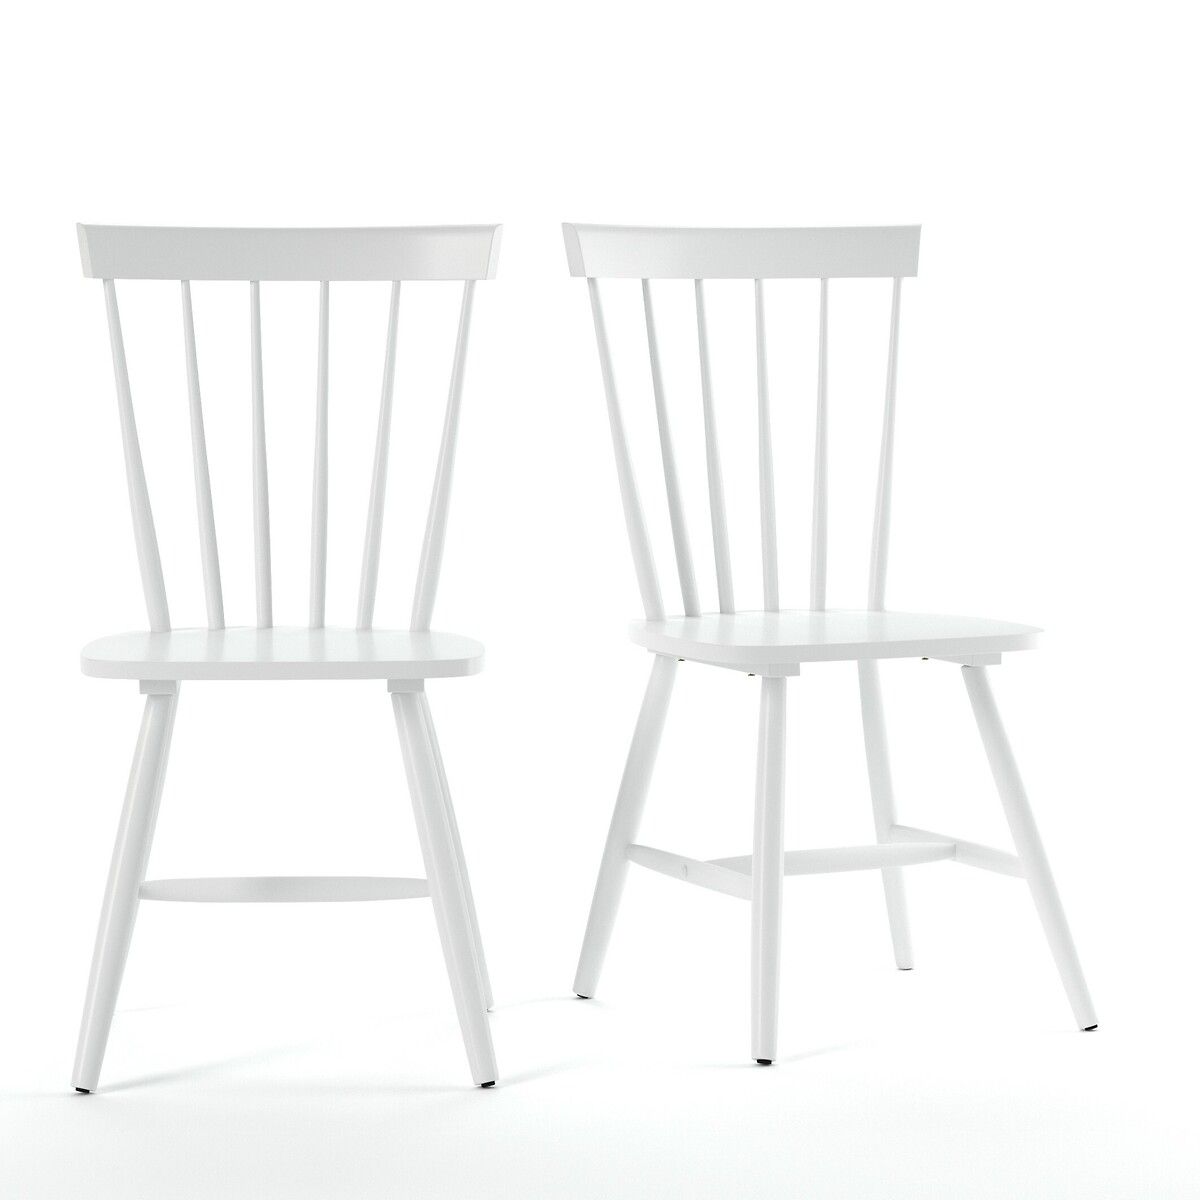 Set of 2 Jimi Solid Wood Spindle-Back Chairs | La Redoute (UK)